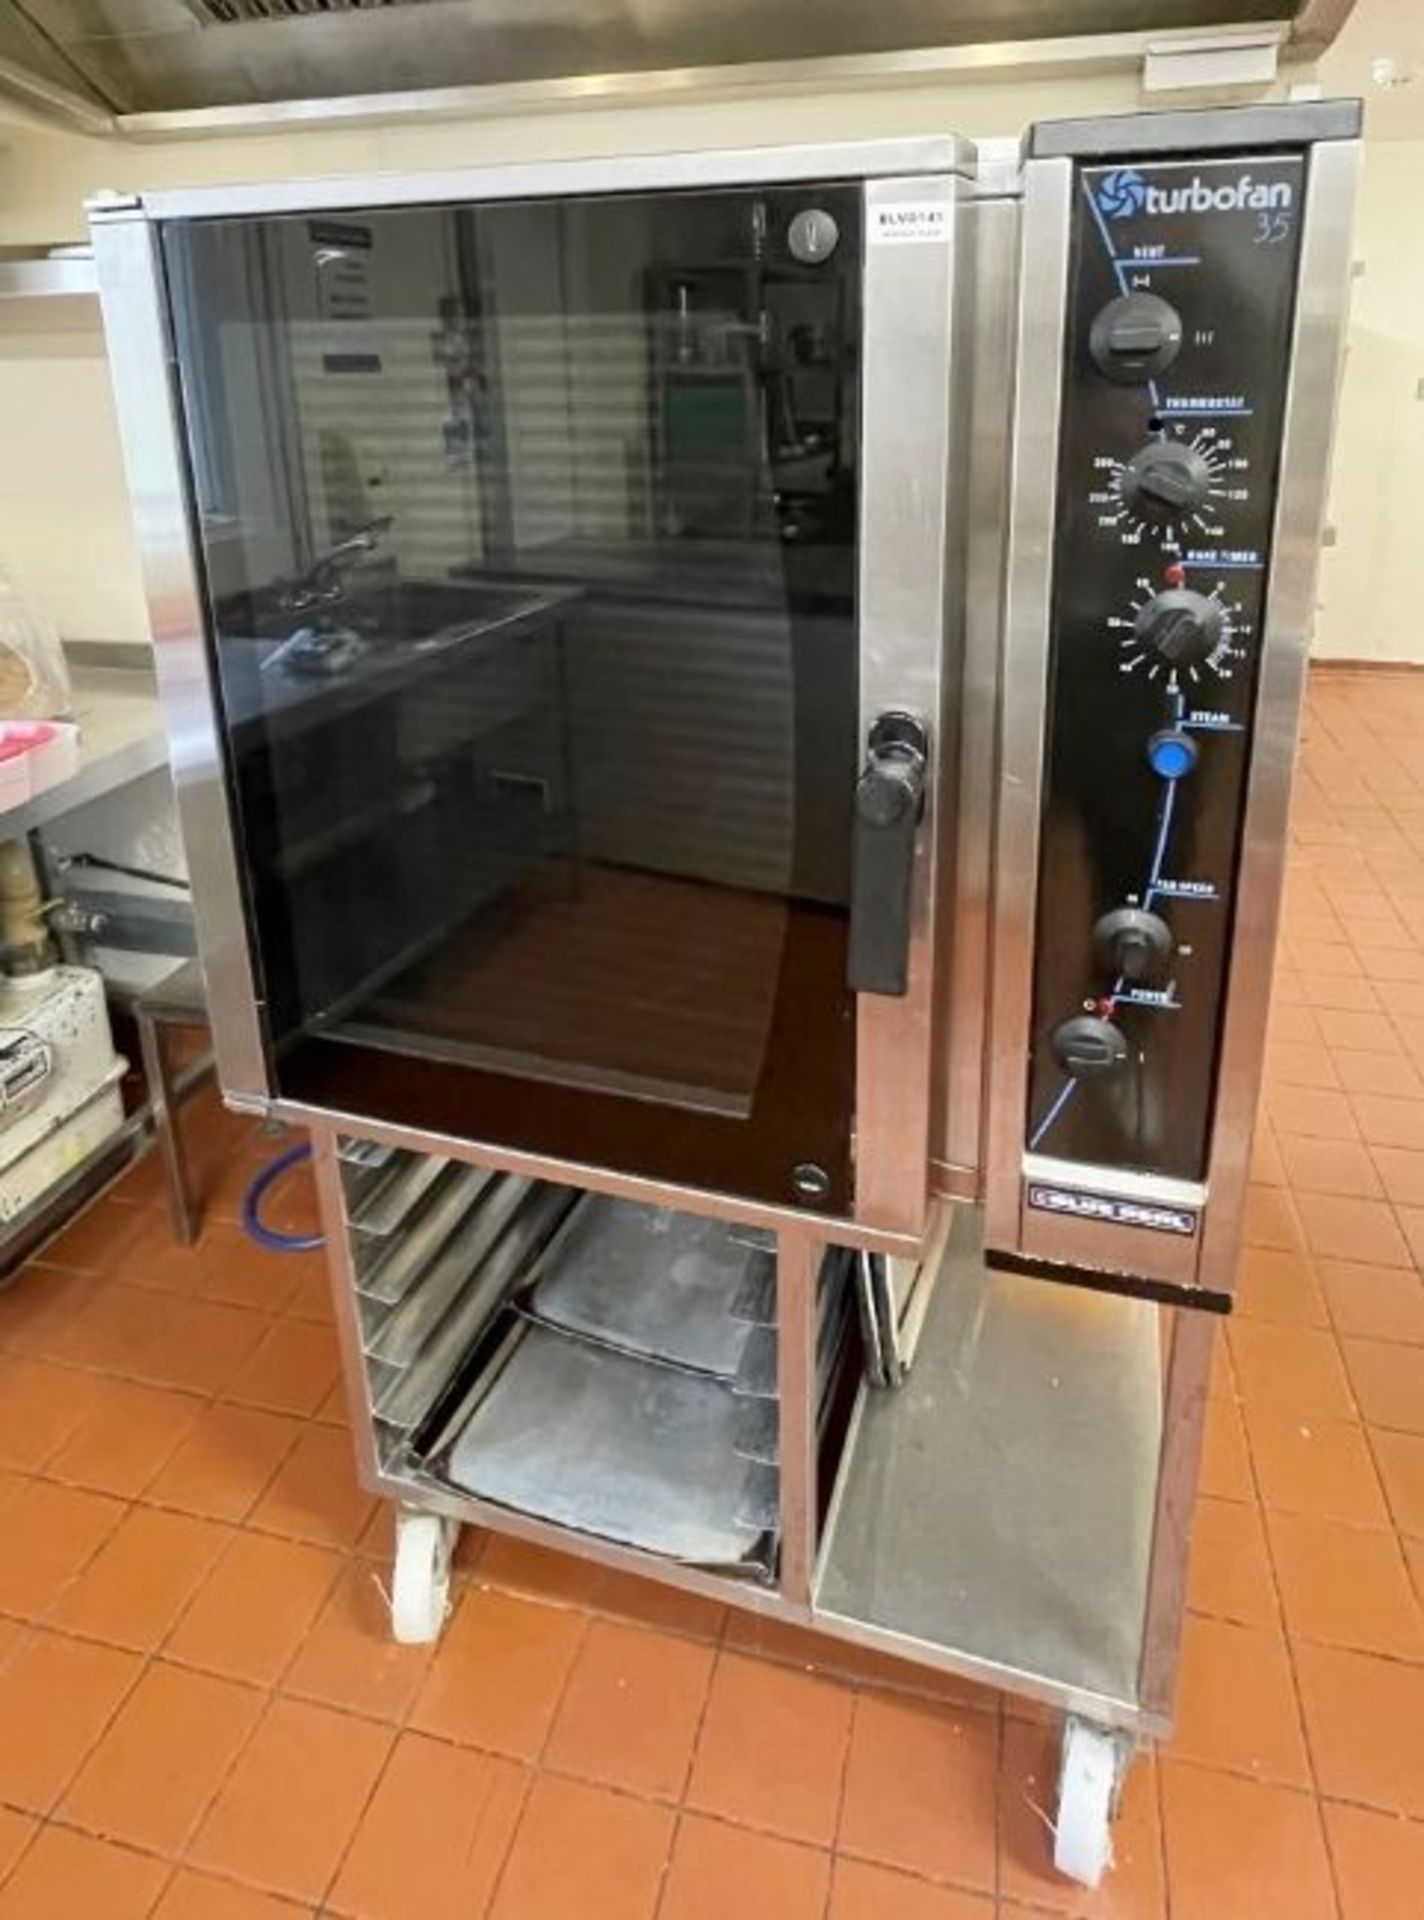 1 x Blue Seal Moffat Turbofan E35 Convection Oven With Stand - Model E35-30-453 - 400v Power - - Image 13 of 16